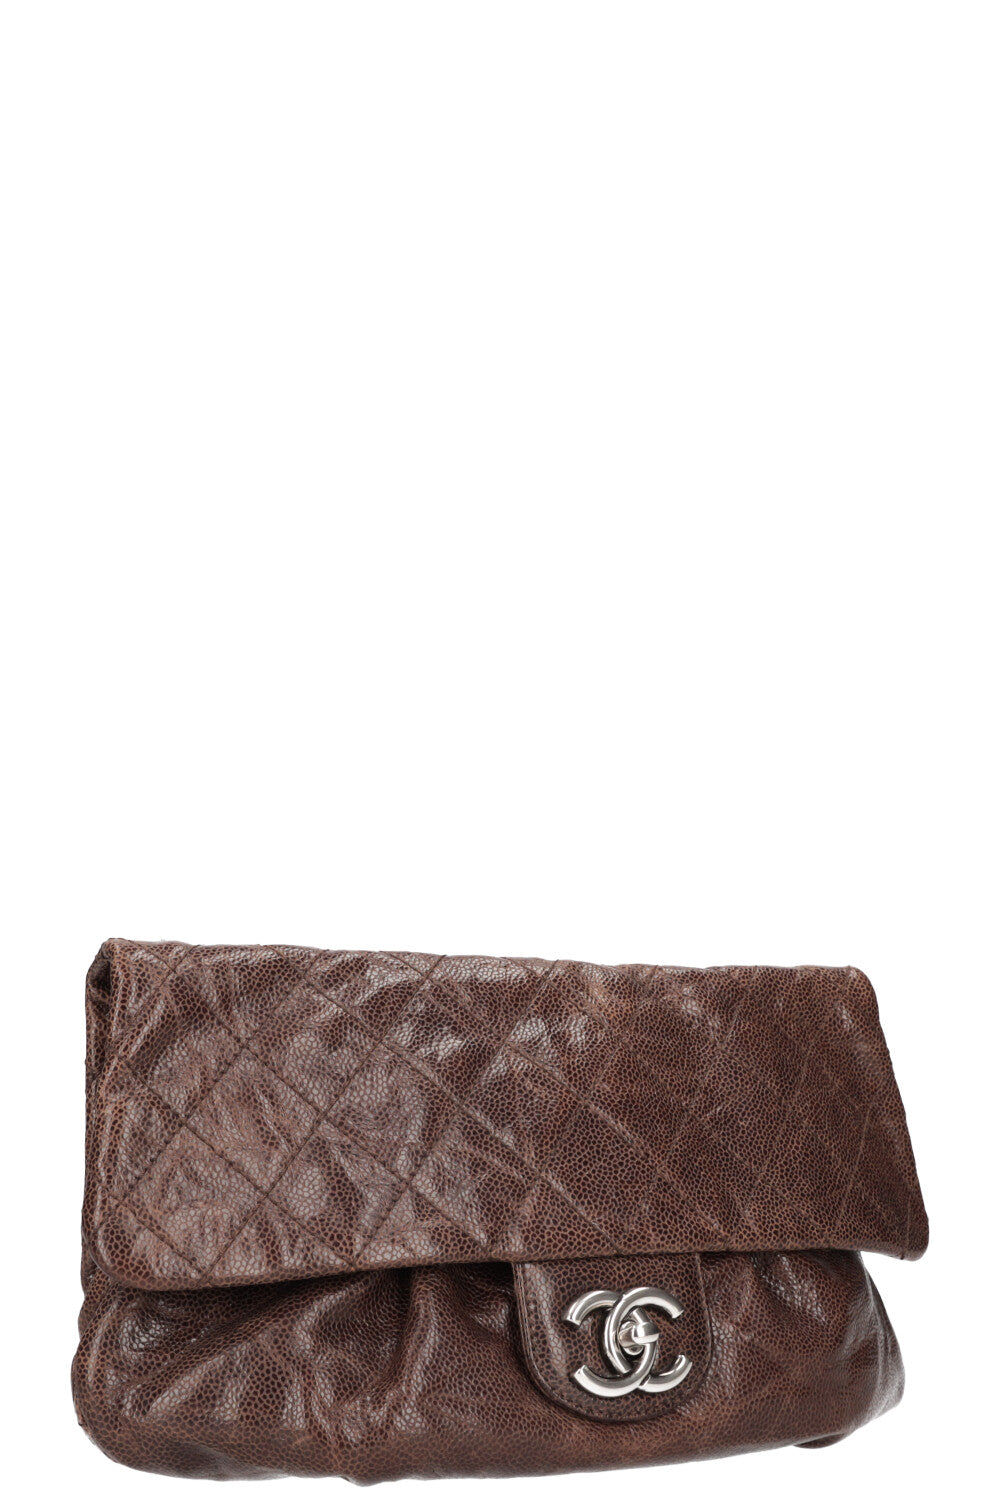 CHANEL Elastic Flap Bag Quilted Glazed Caviar Brown